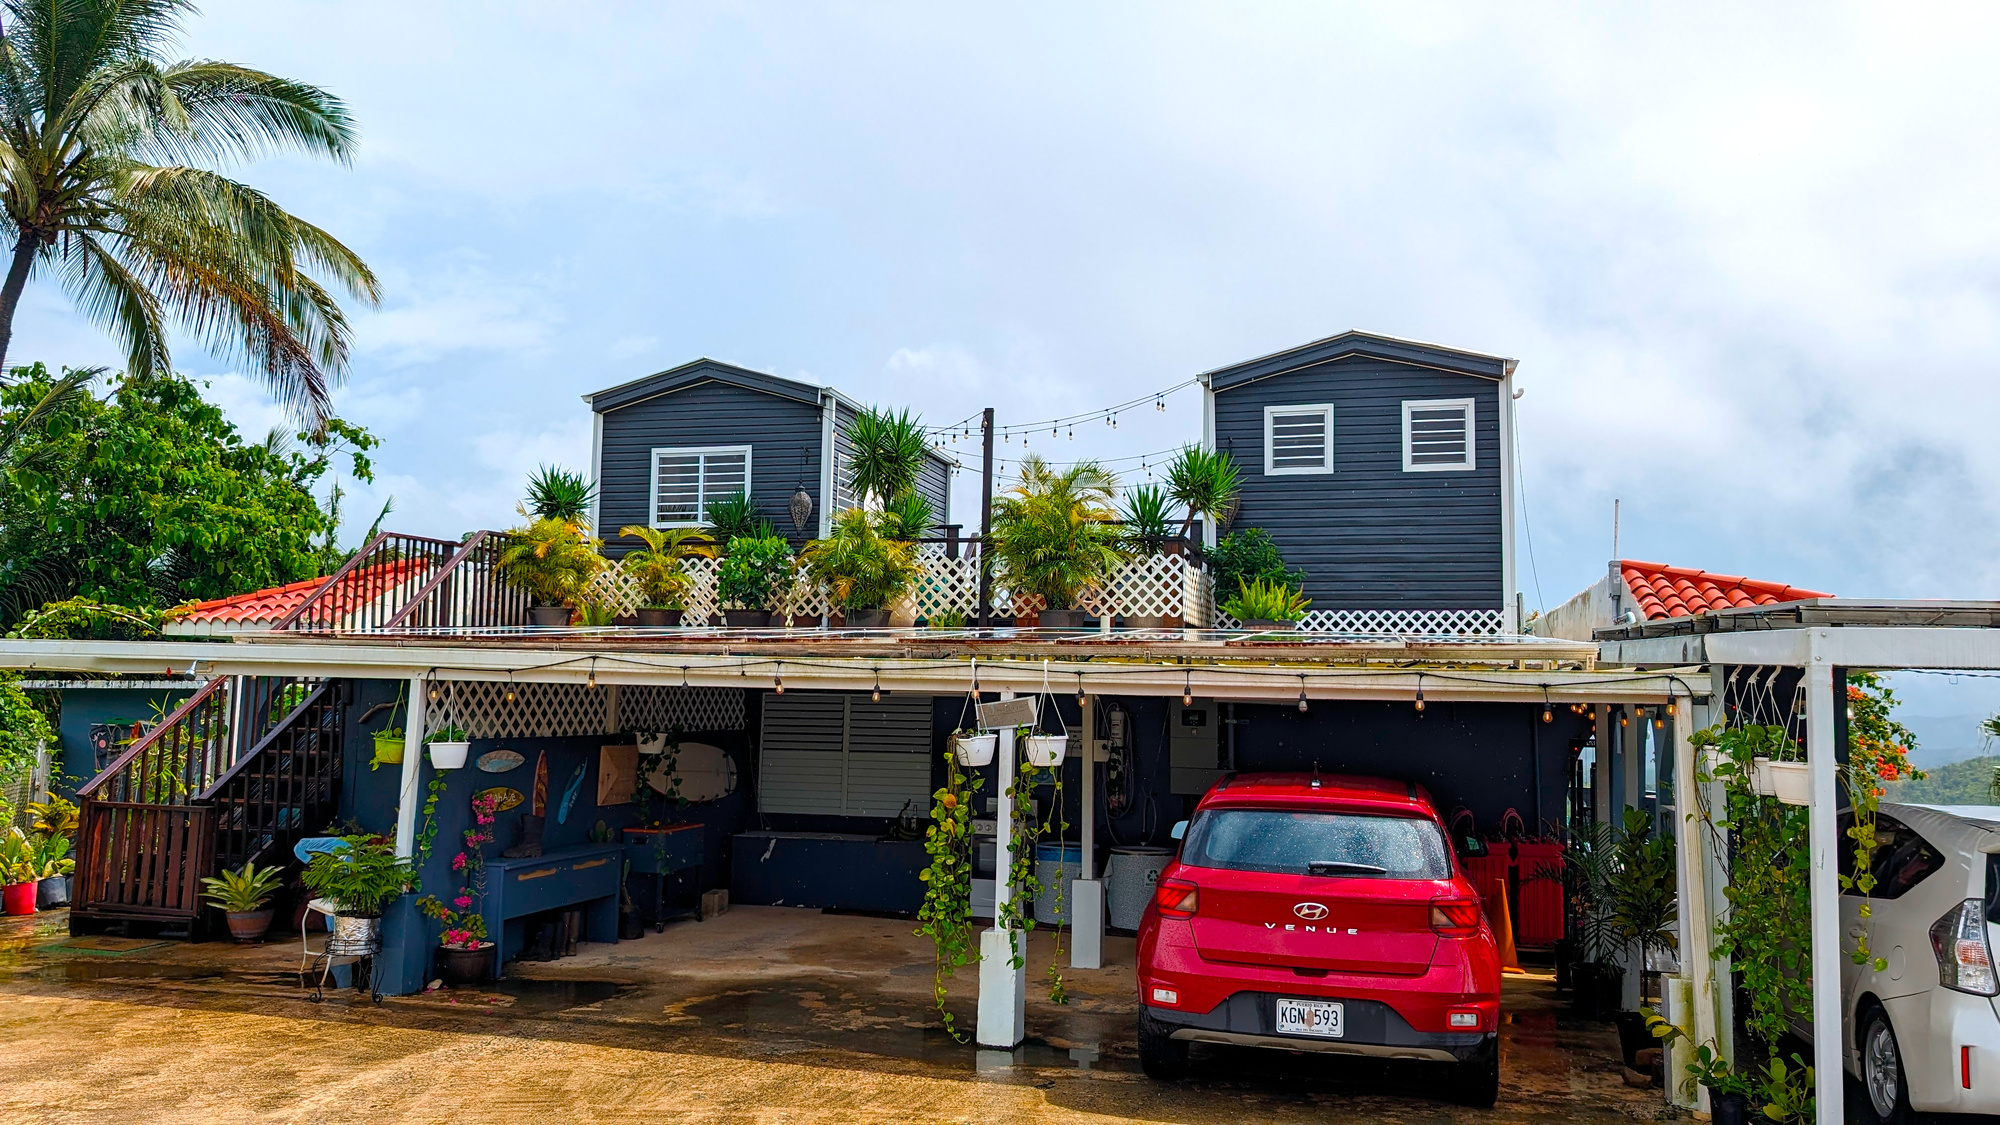 A red car underneath a carport topped with two tiny homes